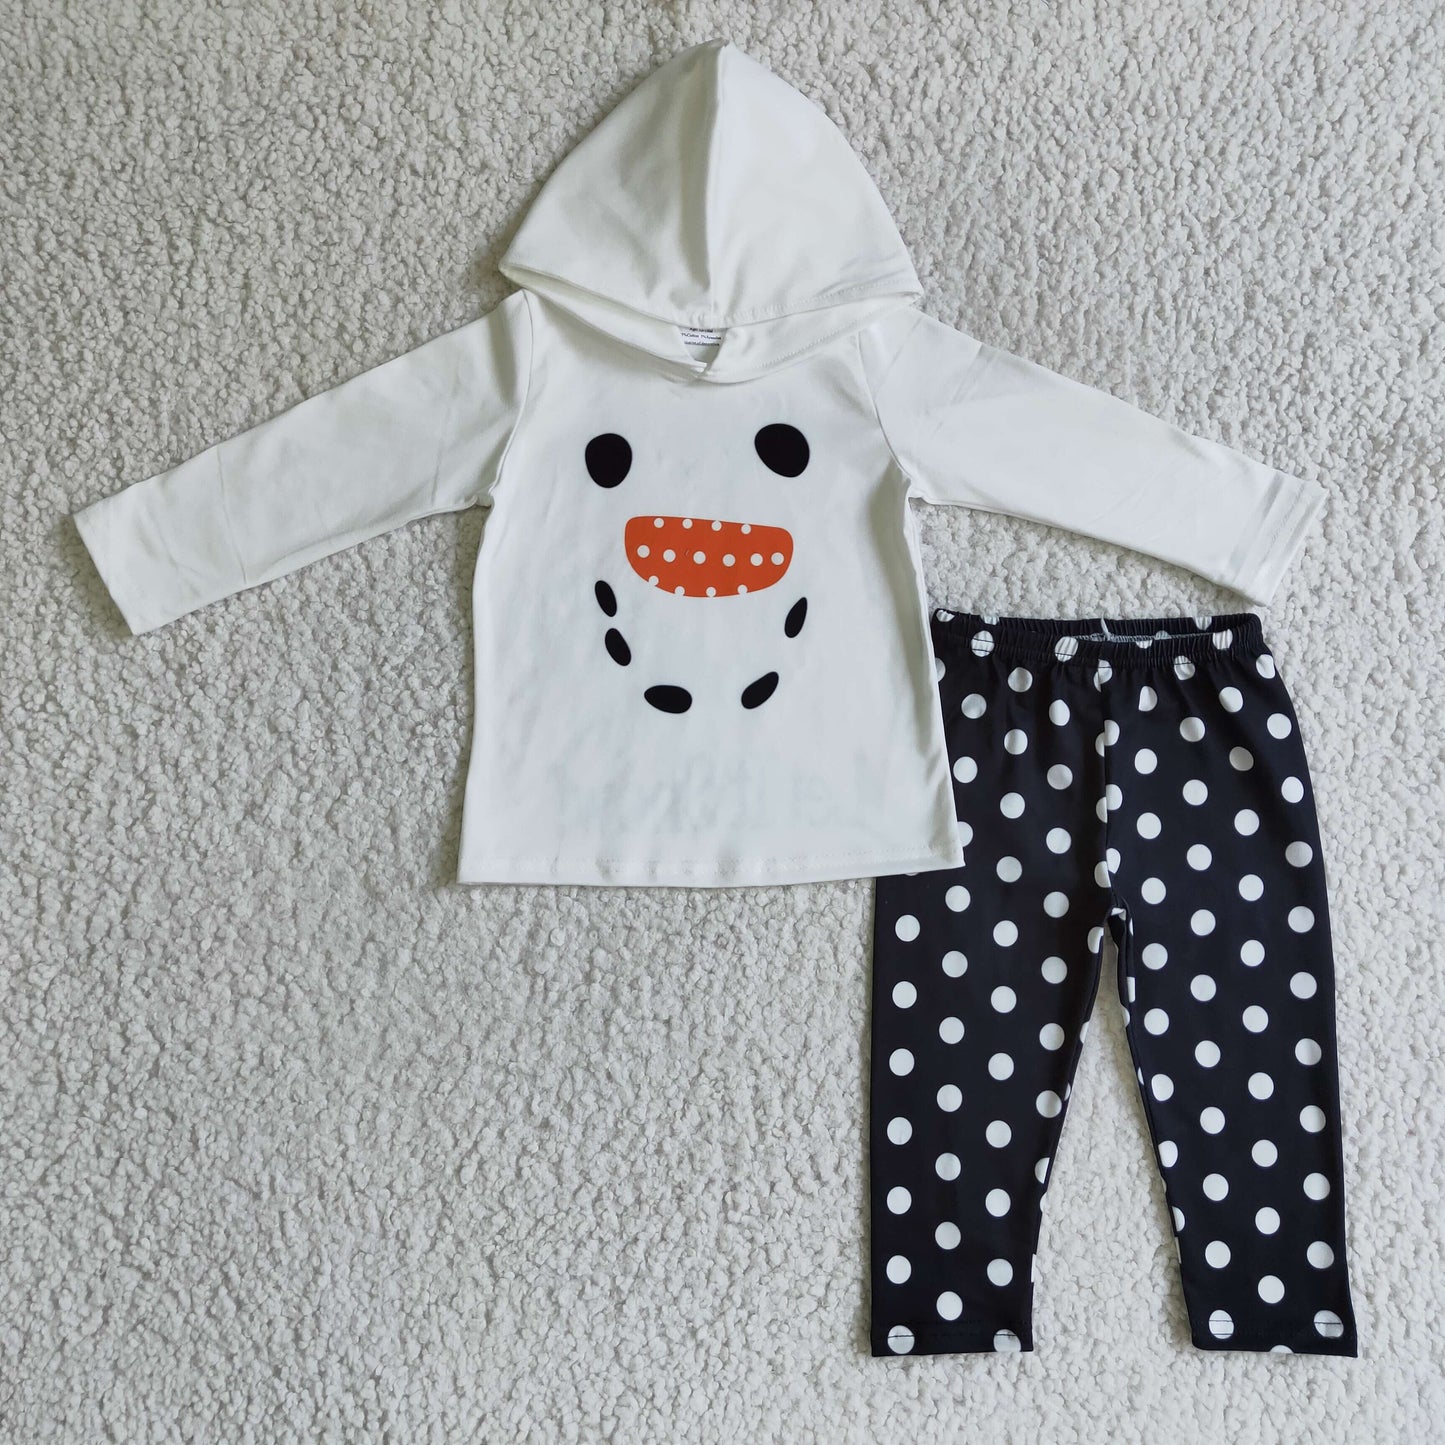 let it snow white hoodie sweater black dots legging outfit